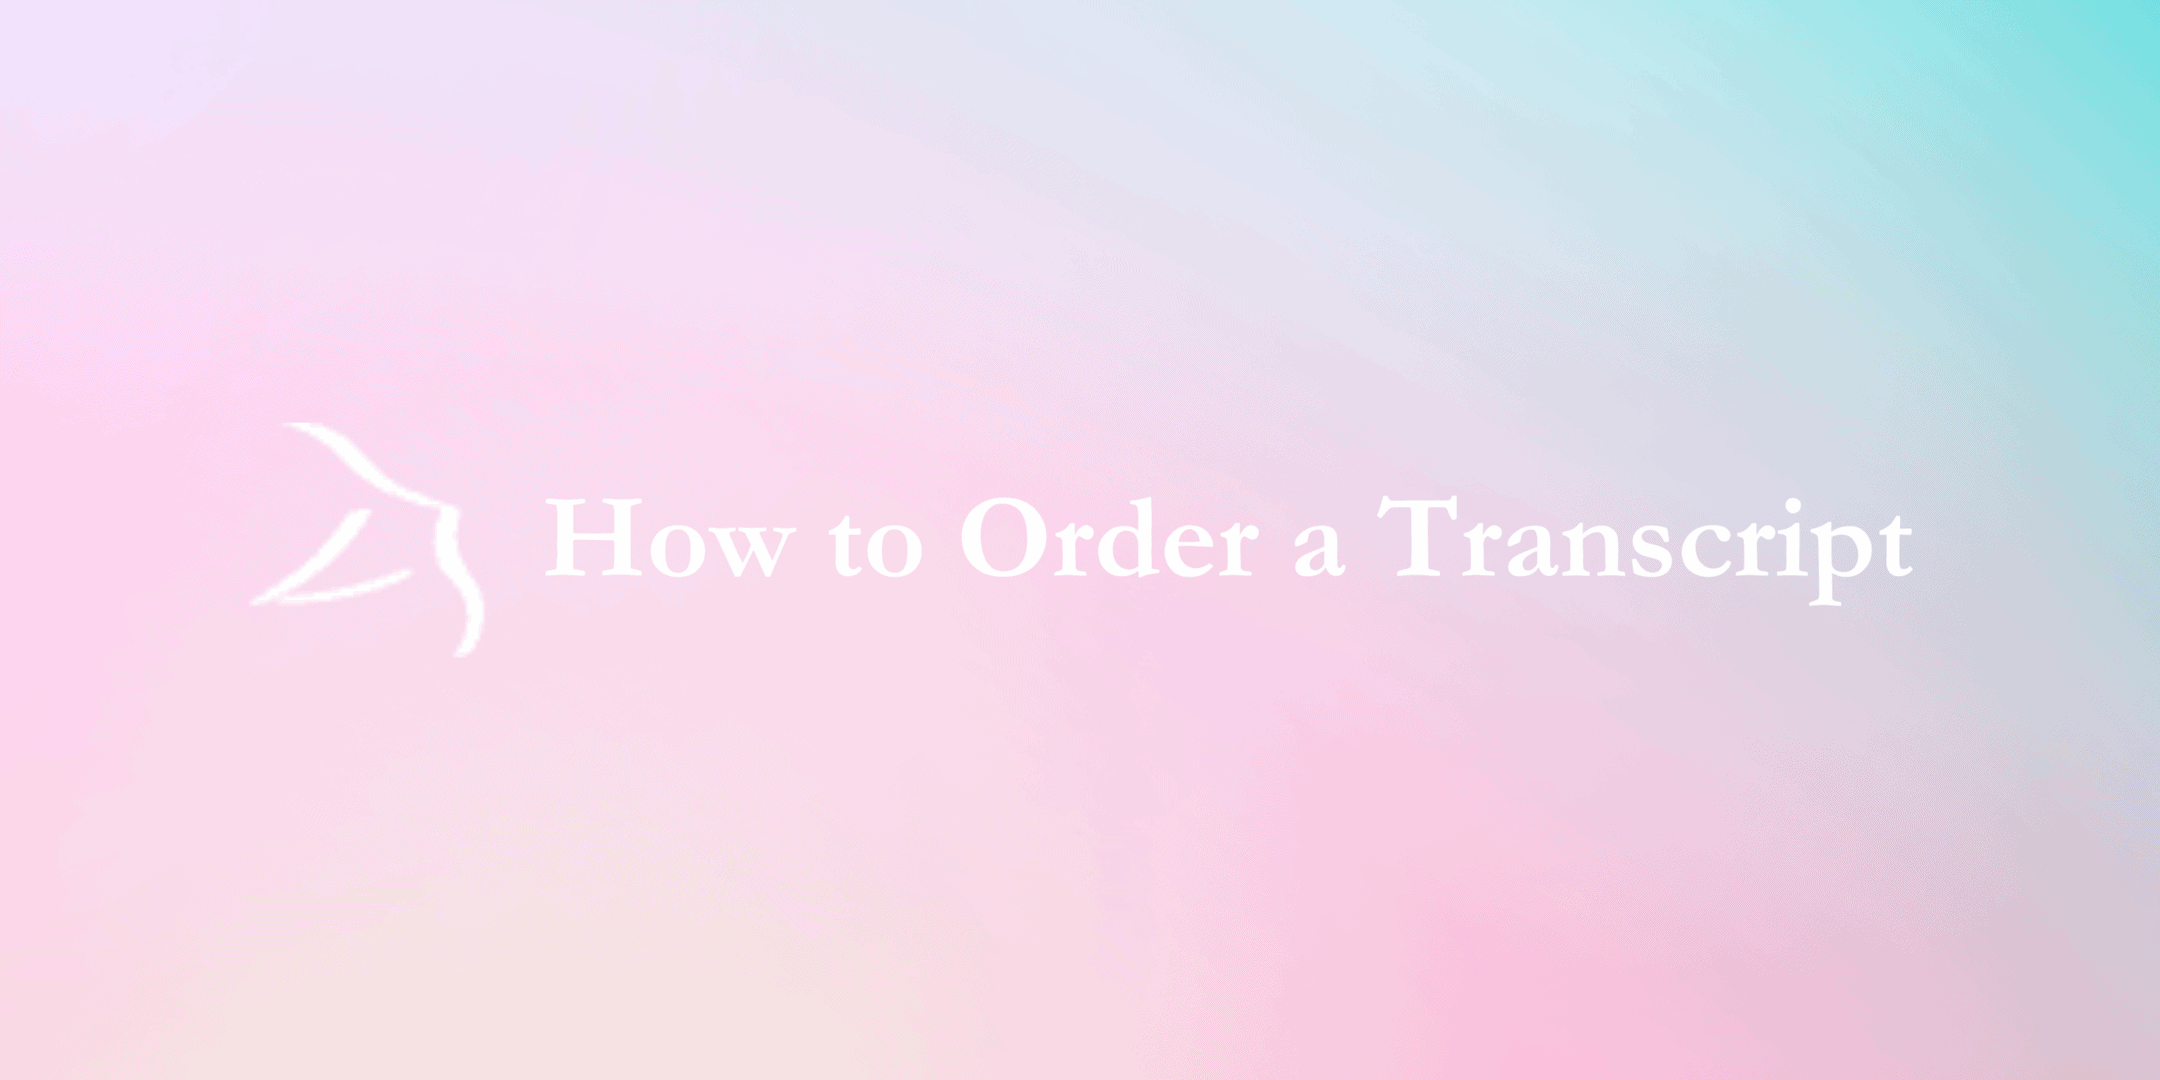 how to order a transcript